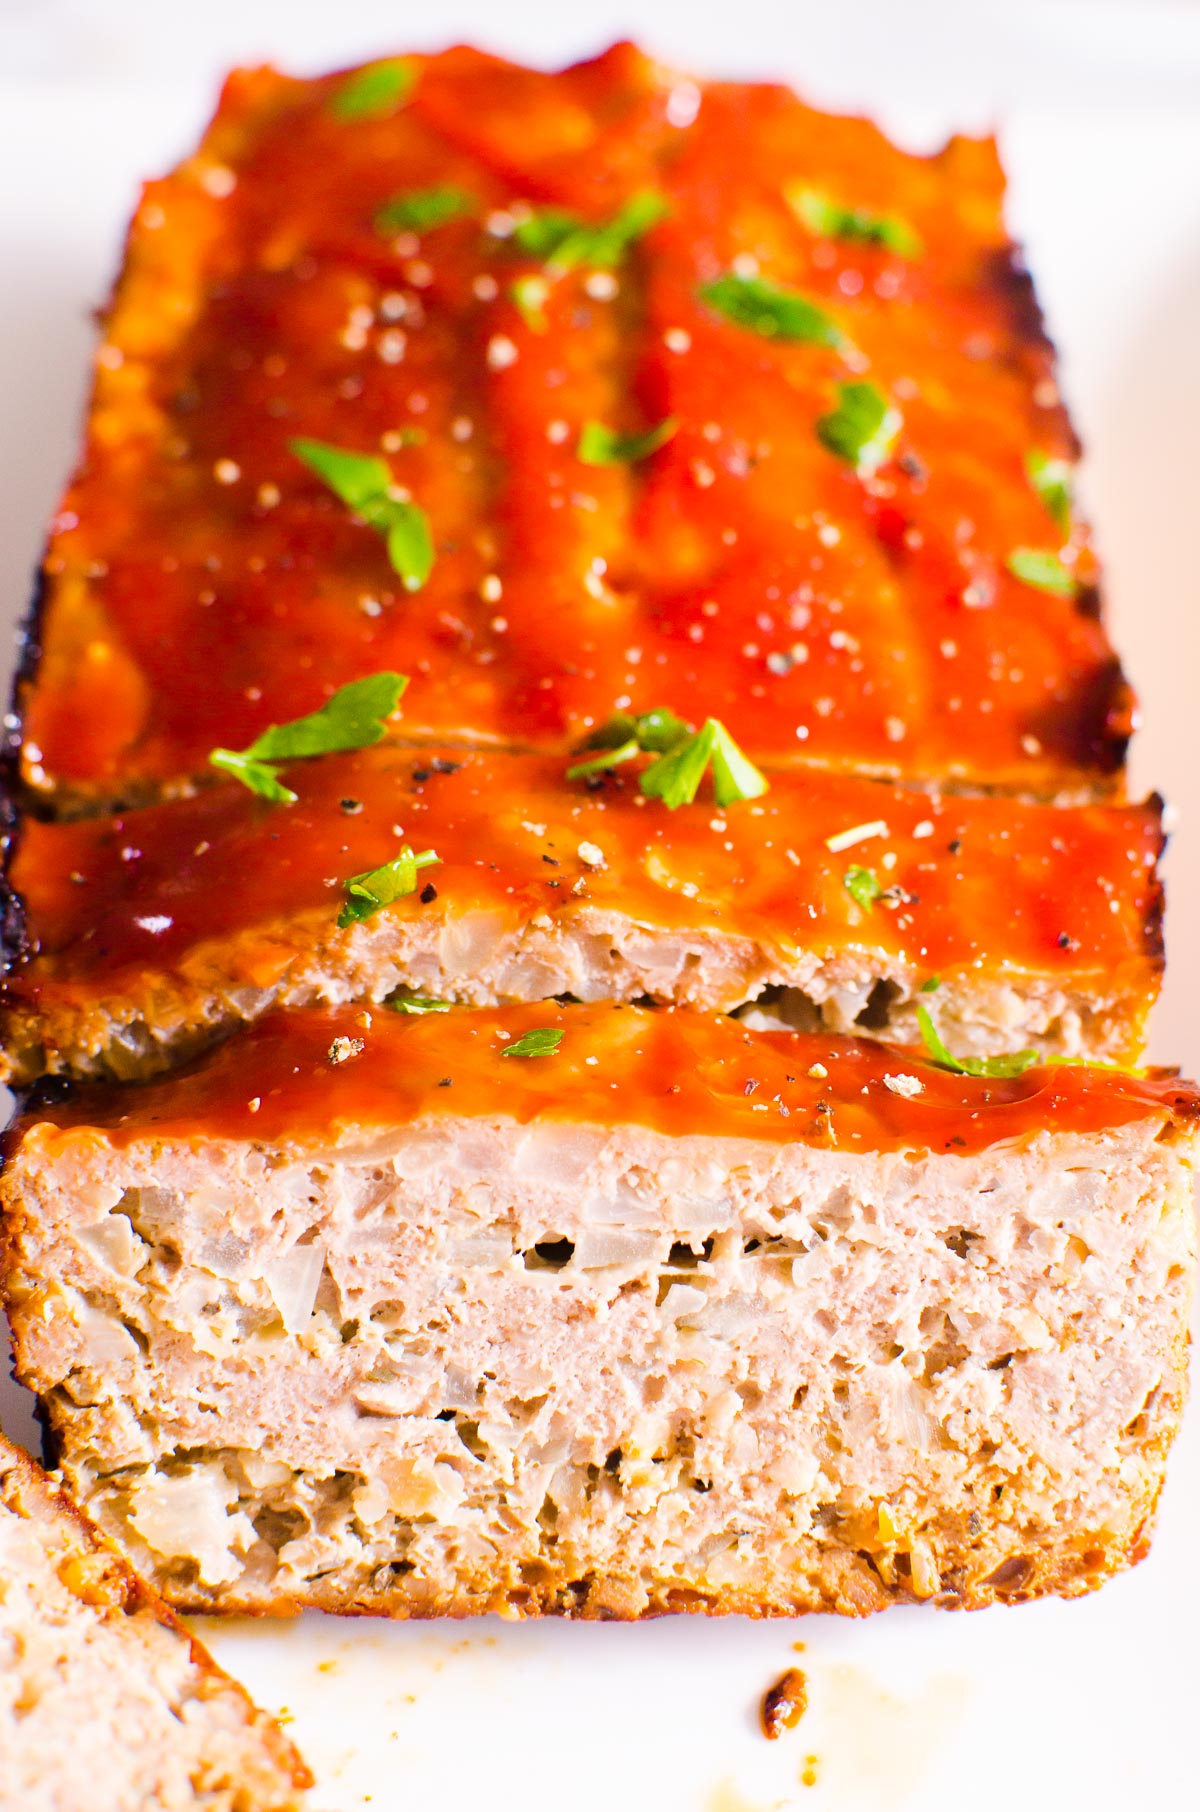 Turkey meatloaf sliced  and garnished with parsley.